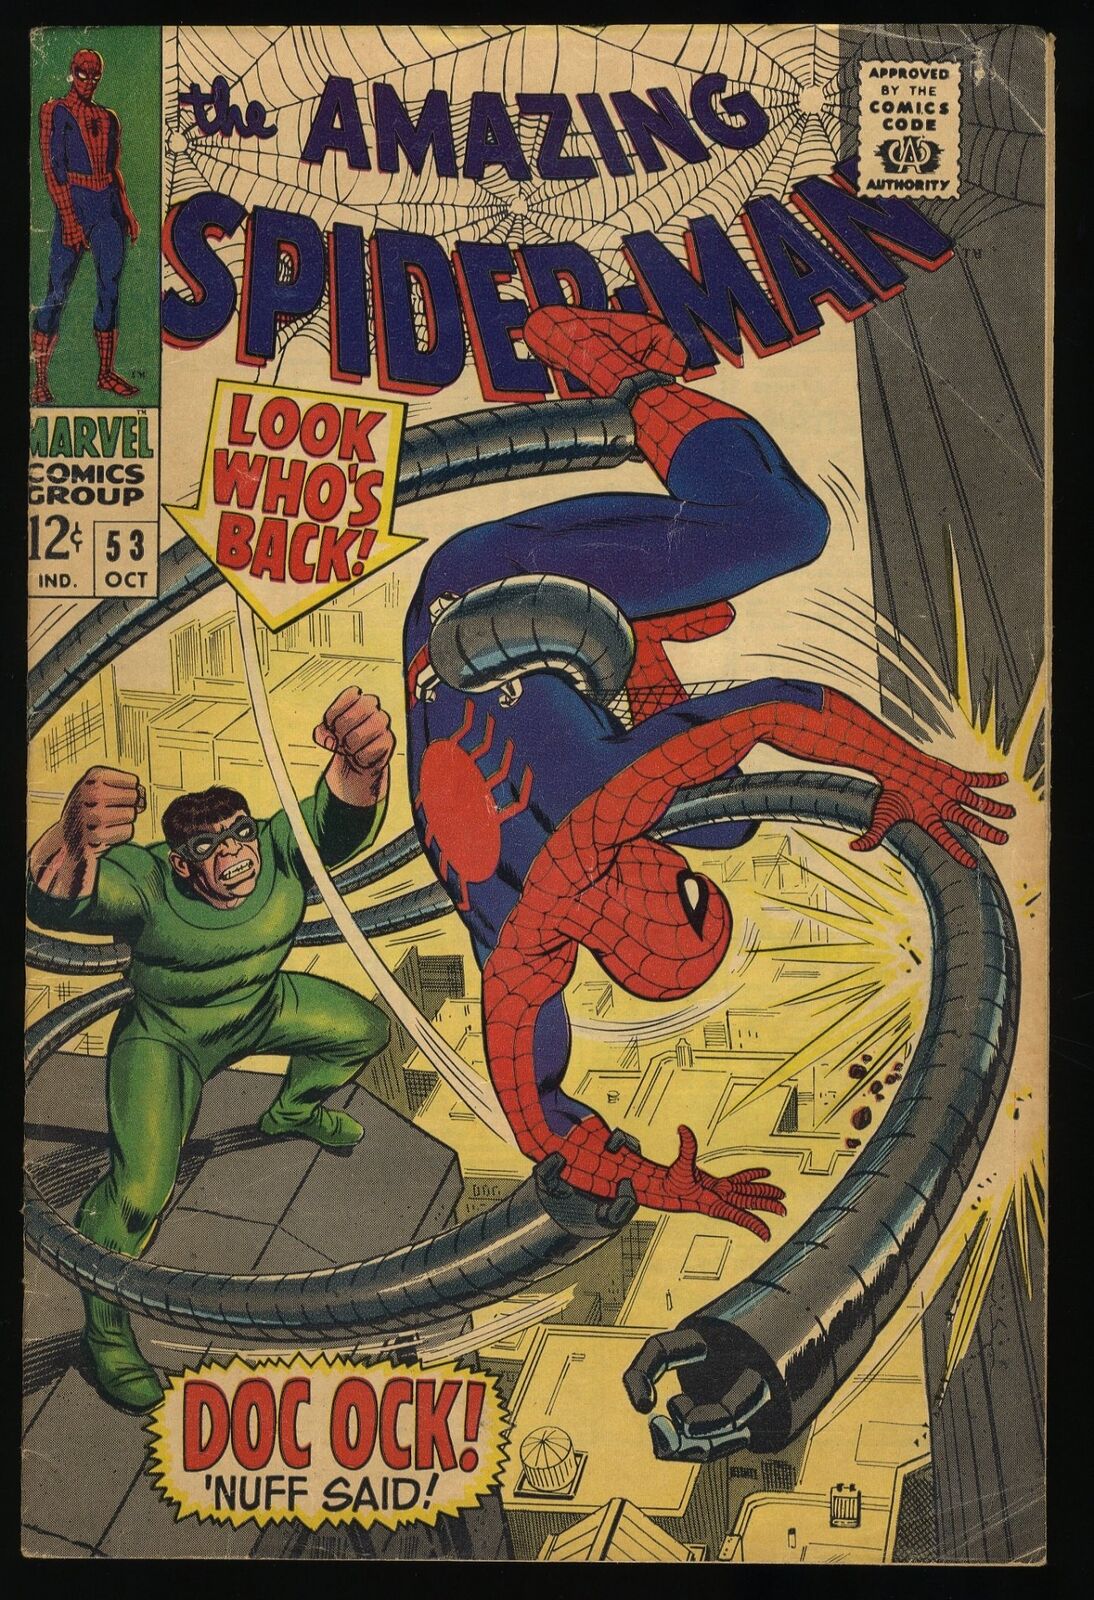 Amazing Spider-Man #53 VG/FN 5.0 Doctor Octopus Appearance Key Issue